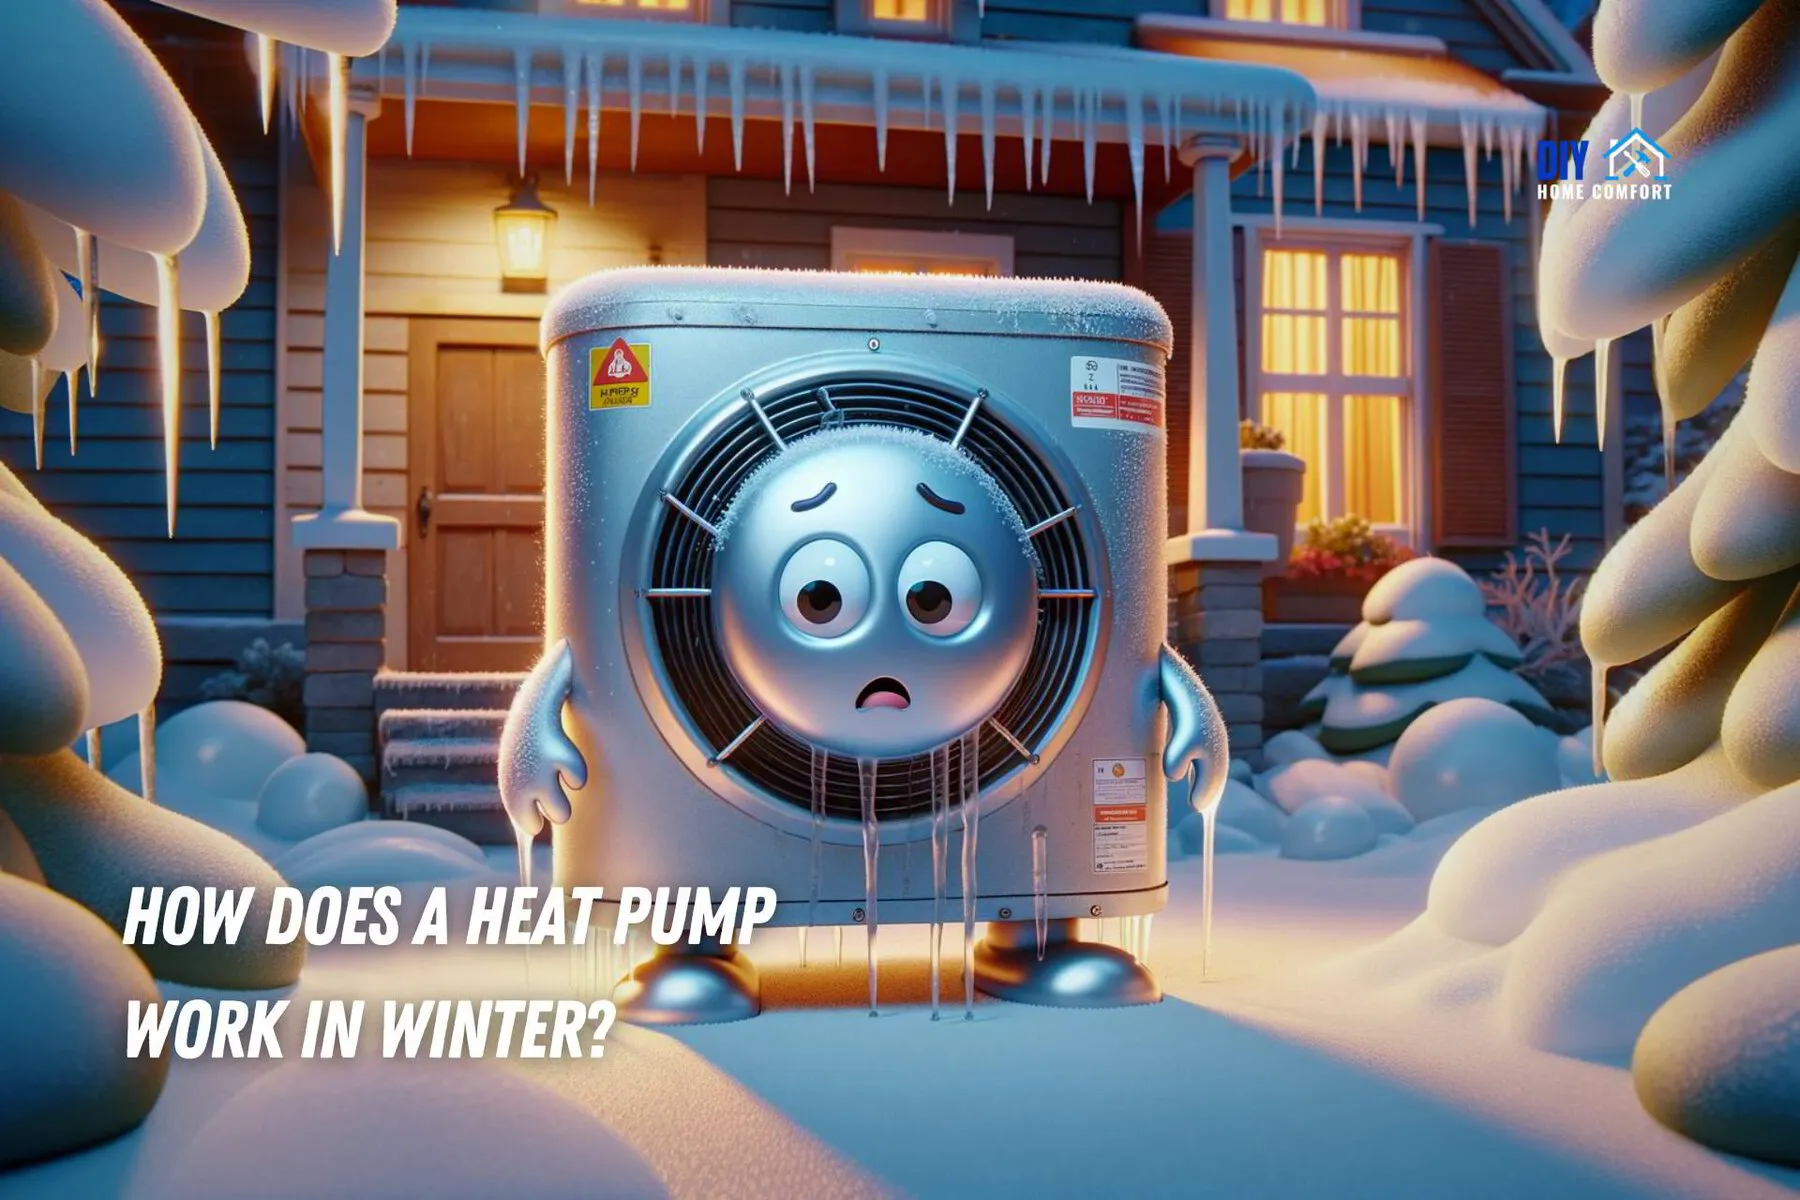 HVAC Insights: How Does a Heat Pump Work in Winter?  | DIY Home Comfort